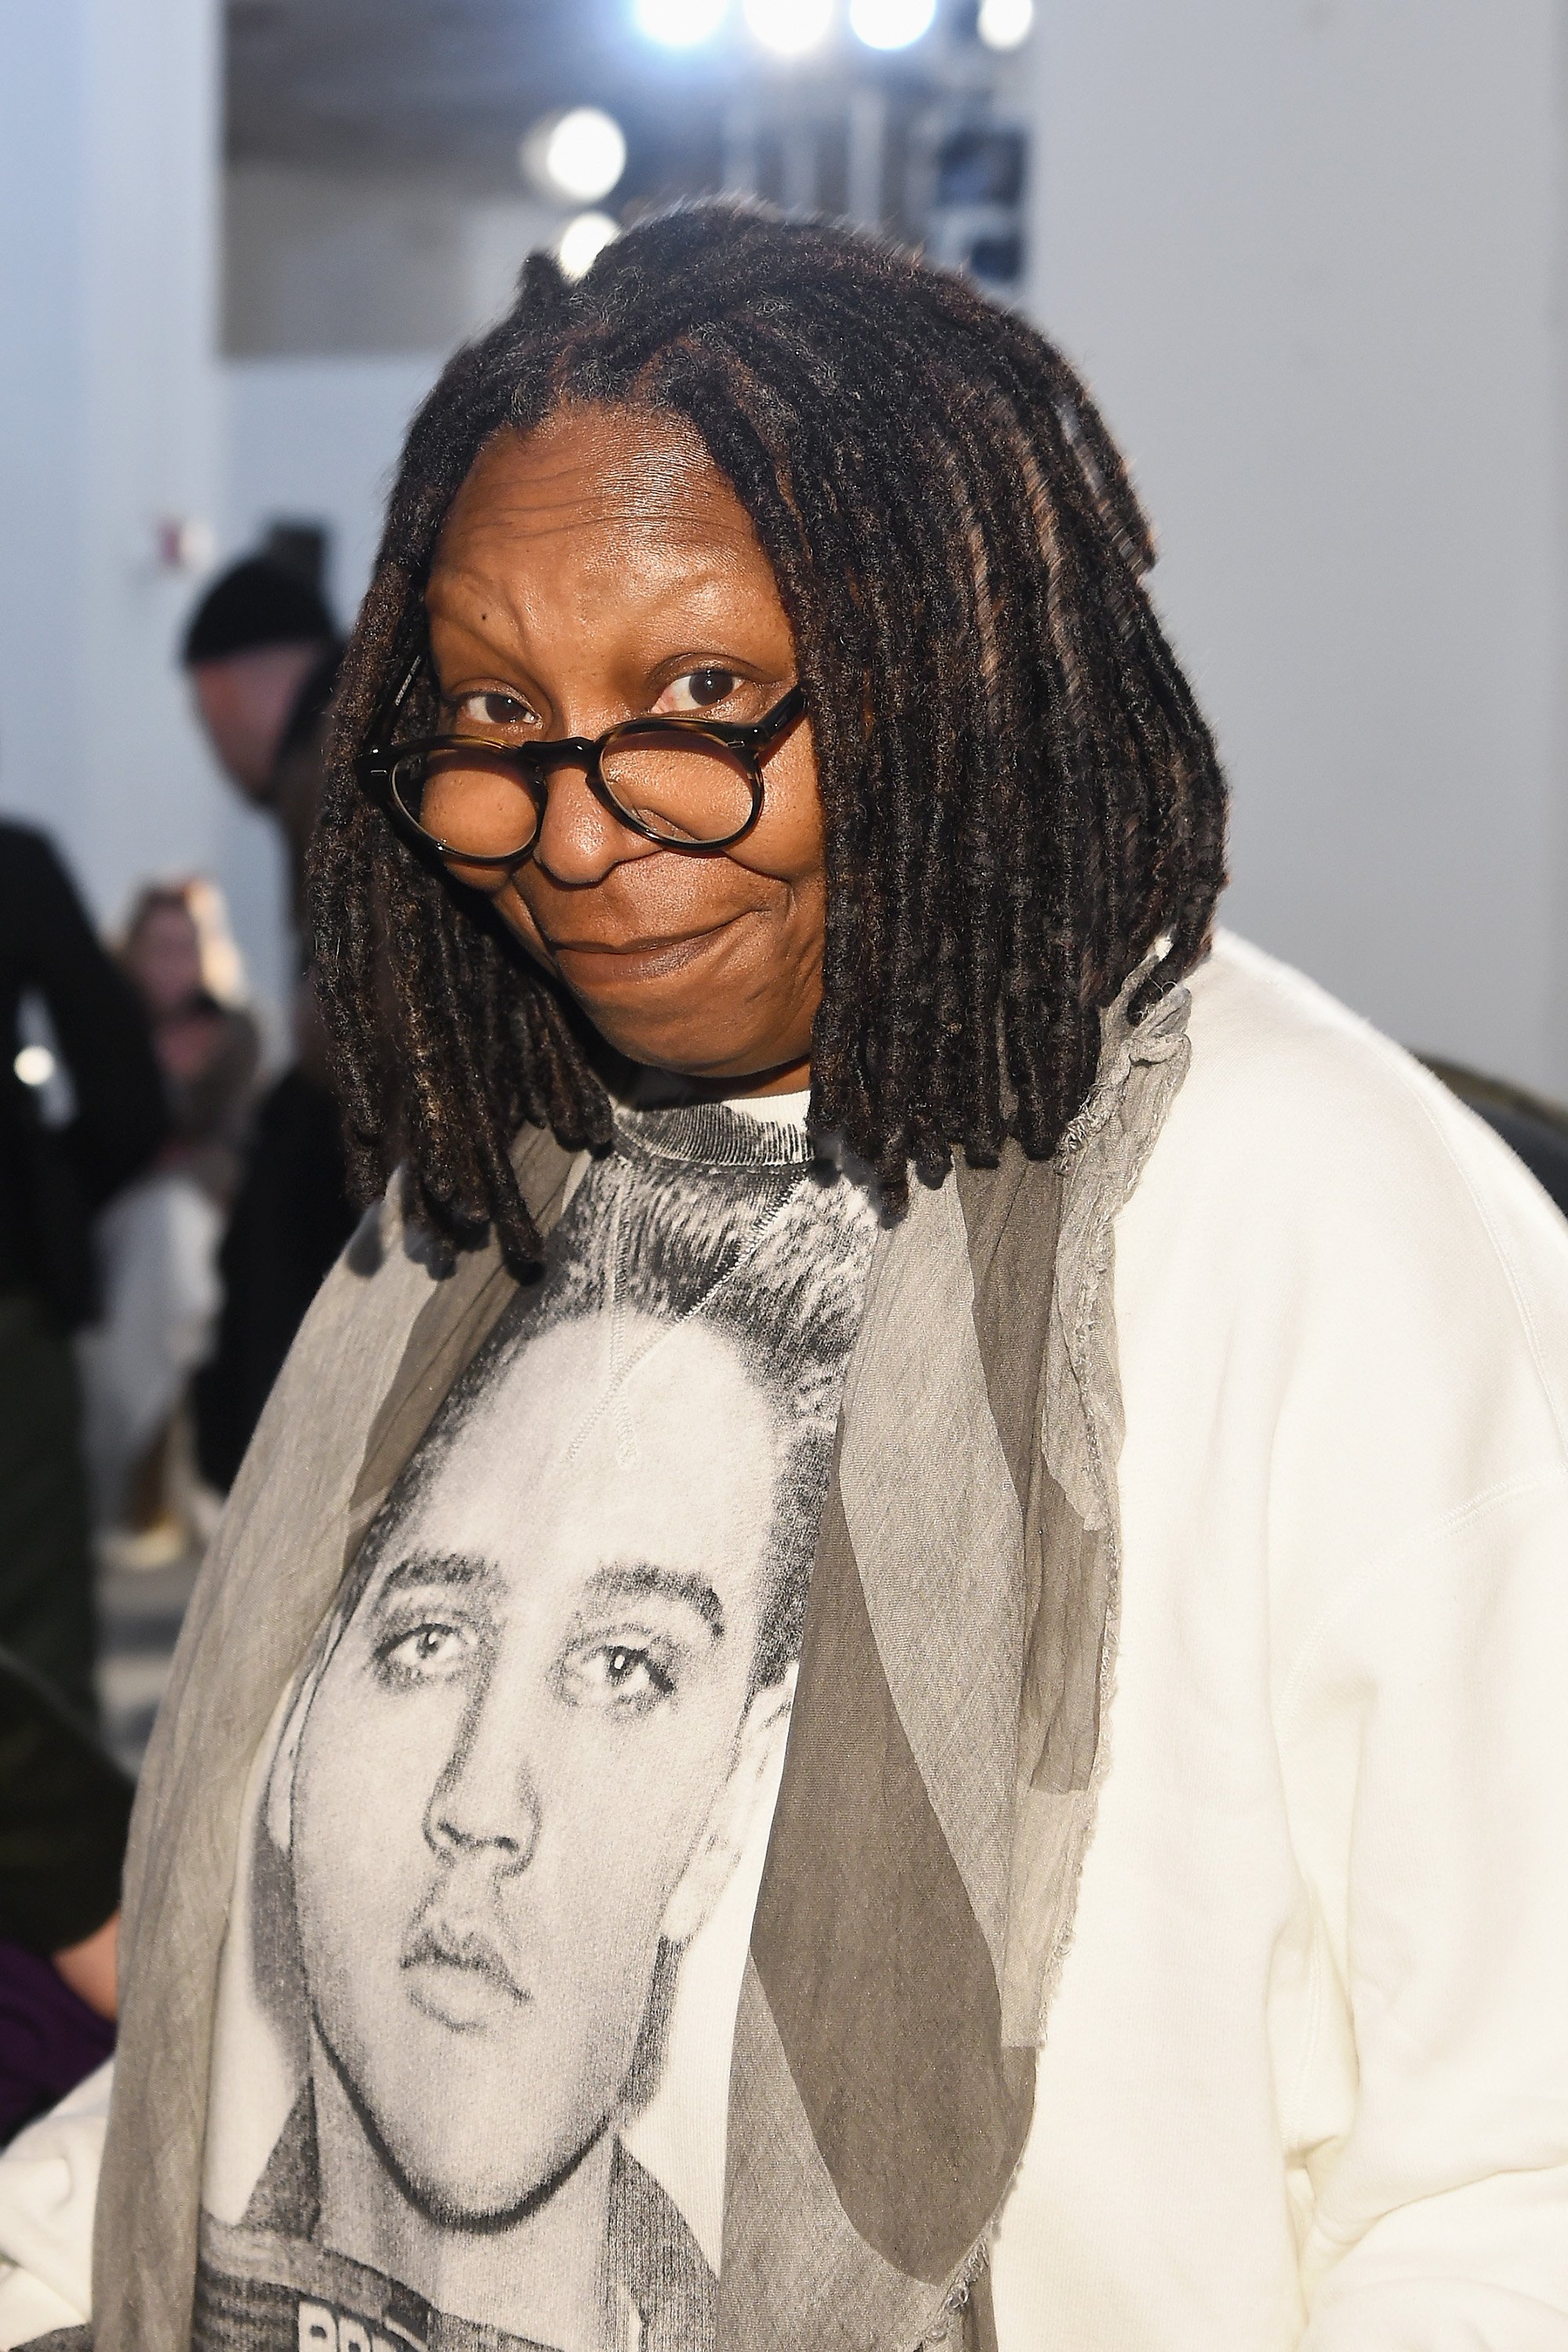 Actress Whoopi Goldberg at the R13 fashion show during New York Fashion Week on February 10, 2018. | Photo: Getty Images